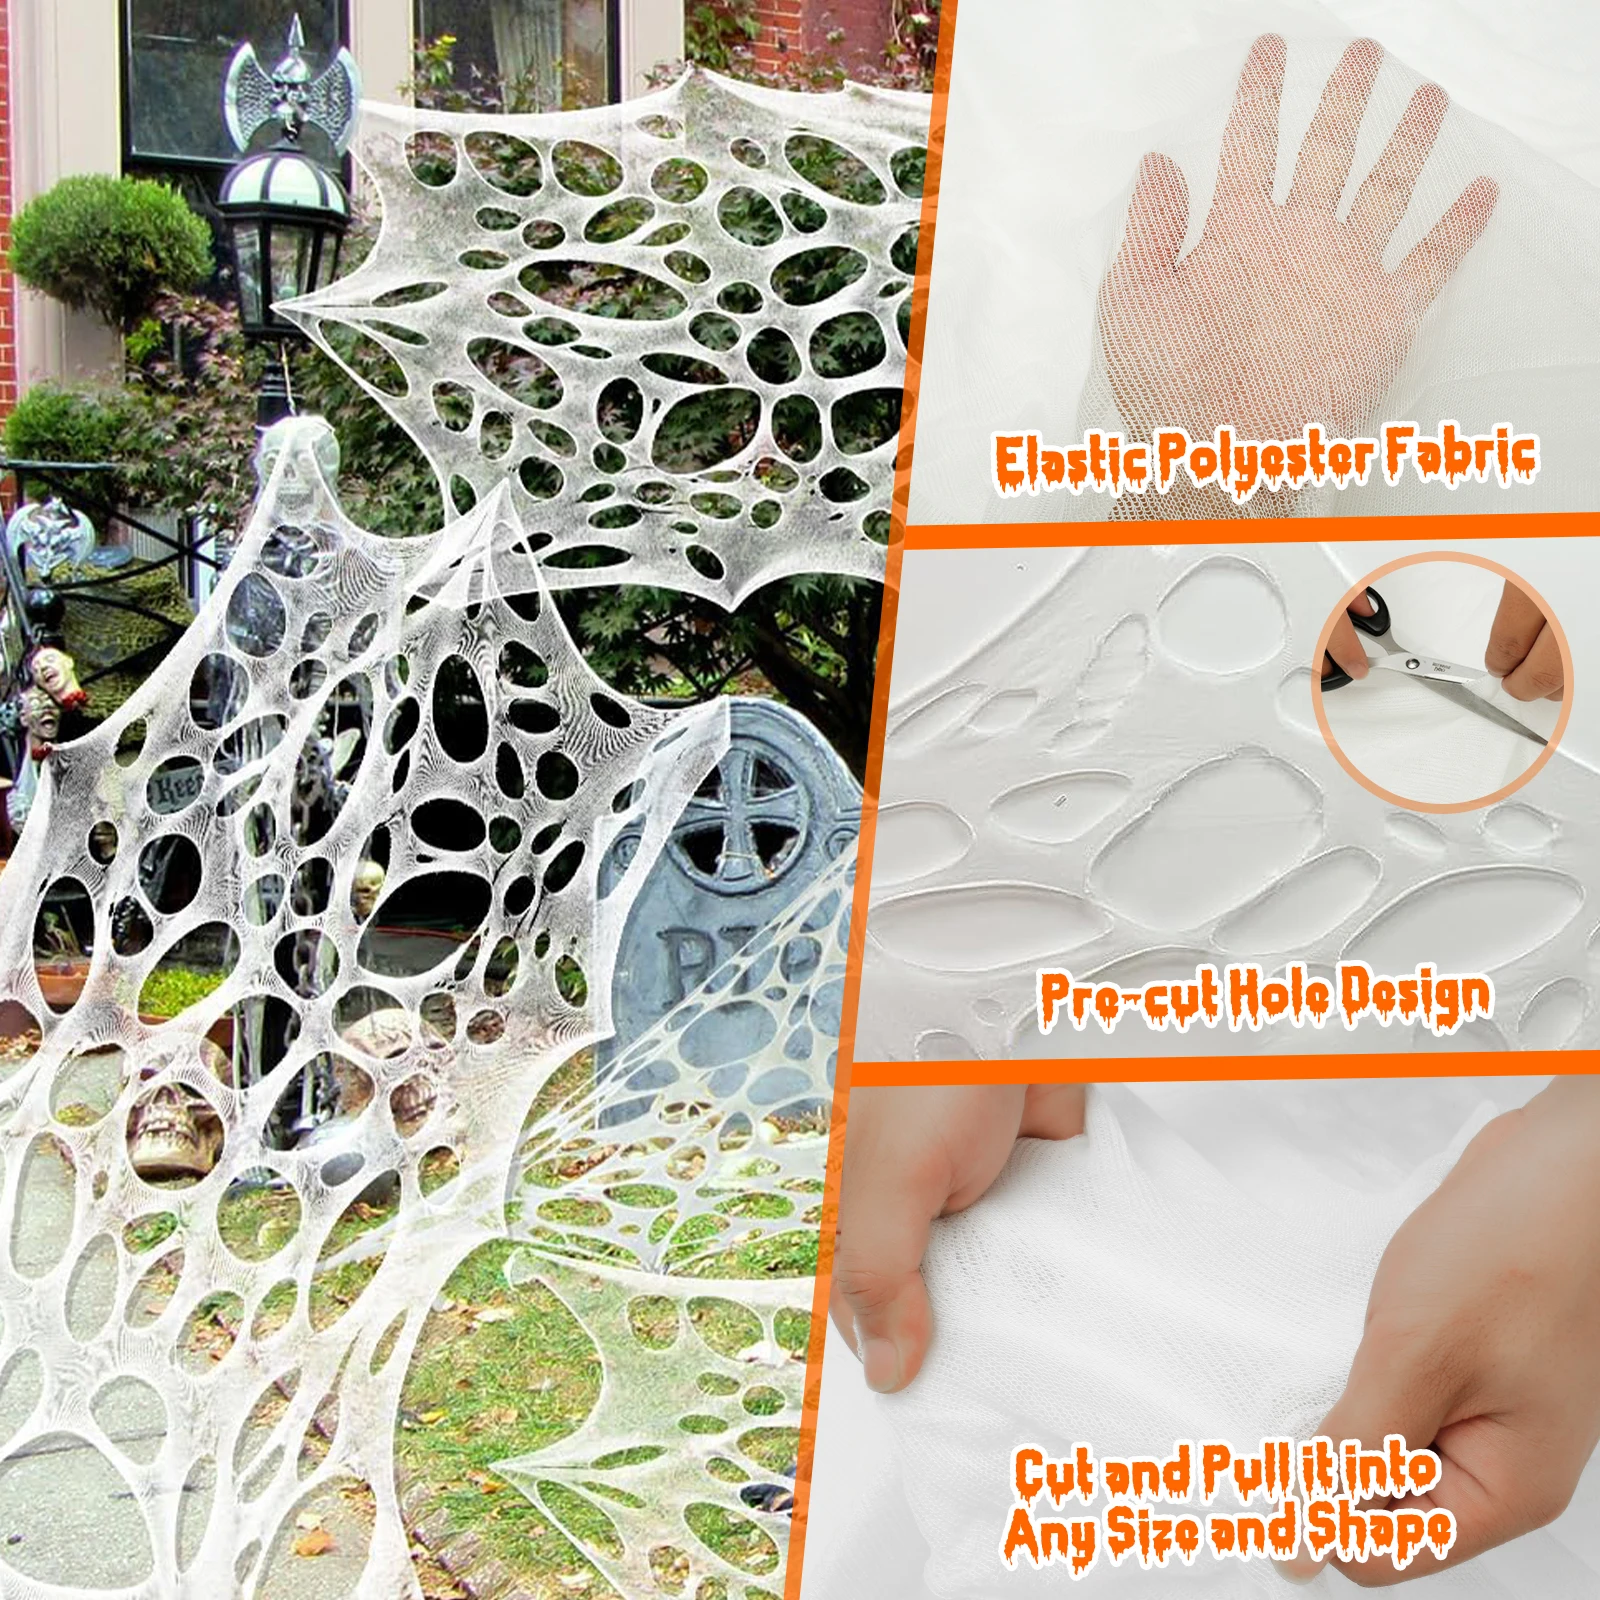 Spider Web Halloween Decorations Outdoor Stretchy Spiders Netting Reusable Washable Spider Web for Halloween Haunted House Decor